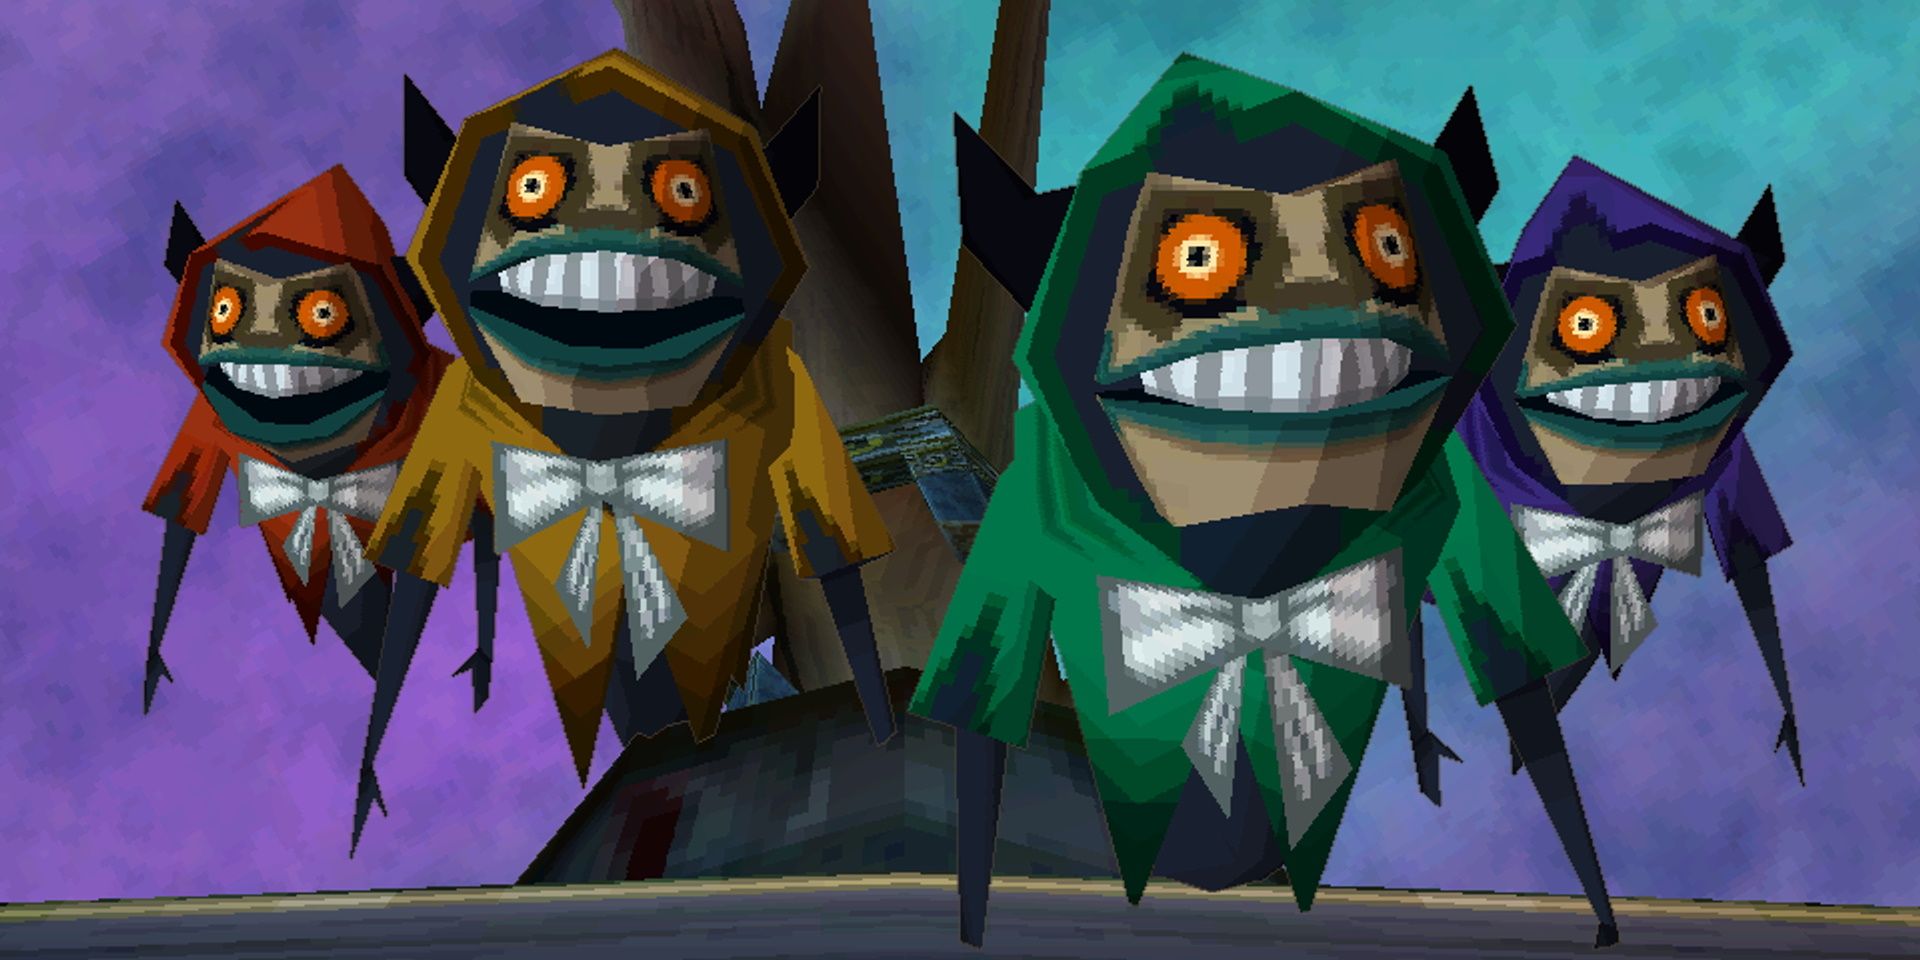 A picture of the Cubus sisters, a boss enemy from Phantom Hourglass